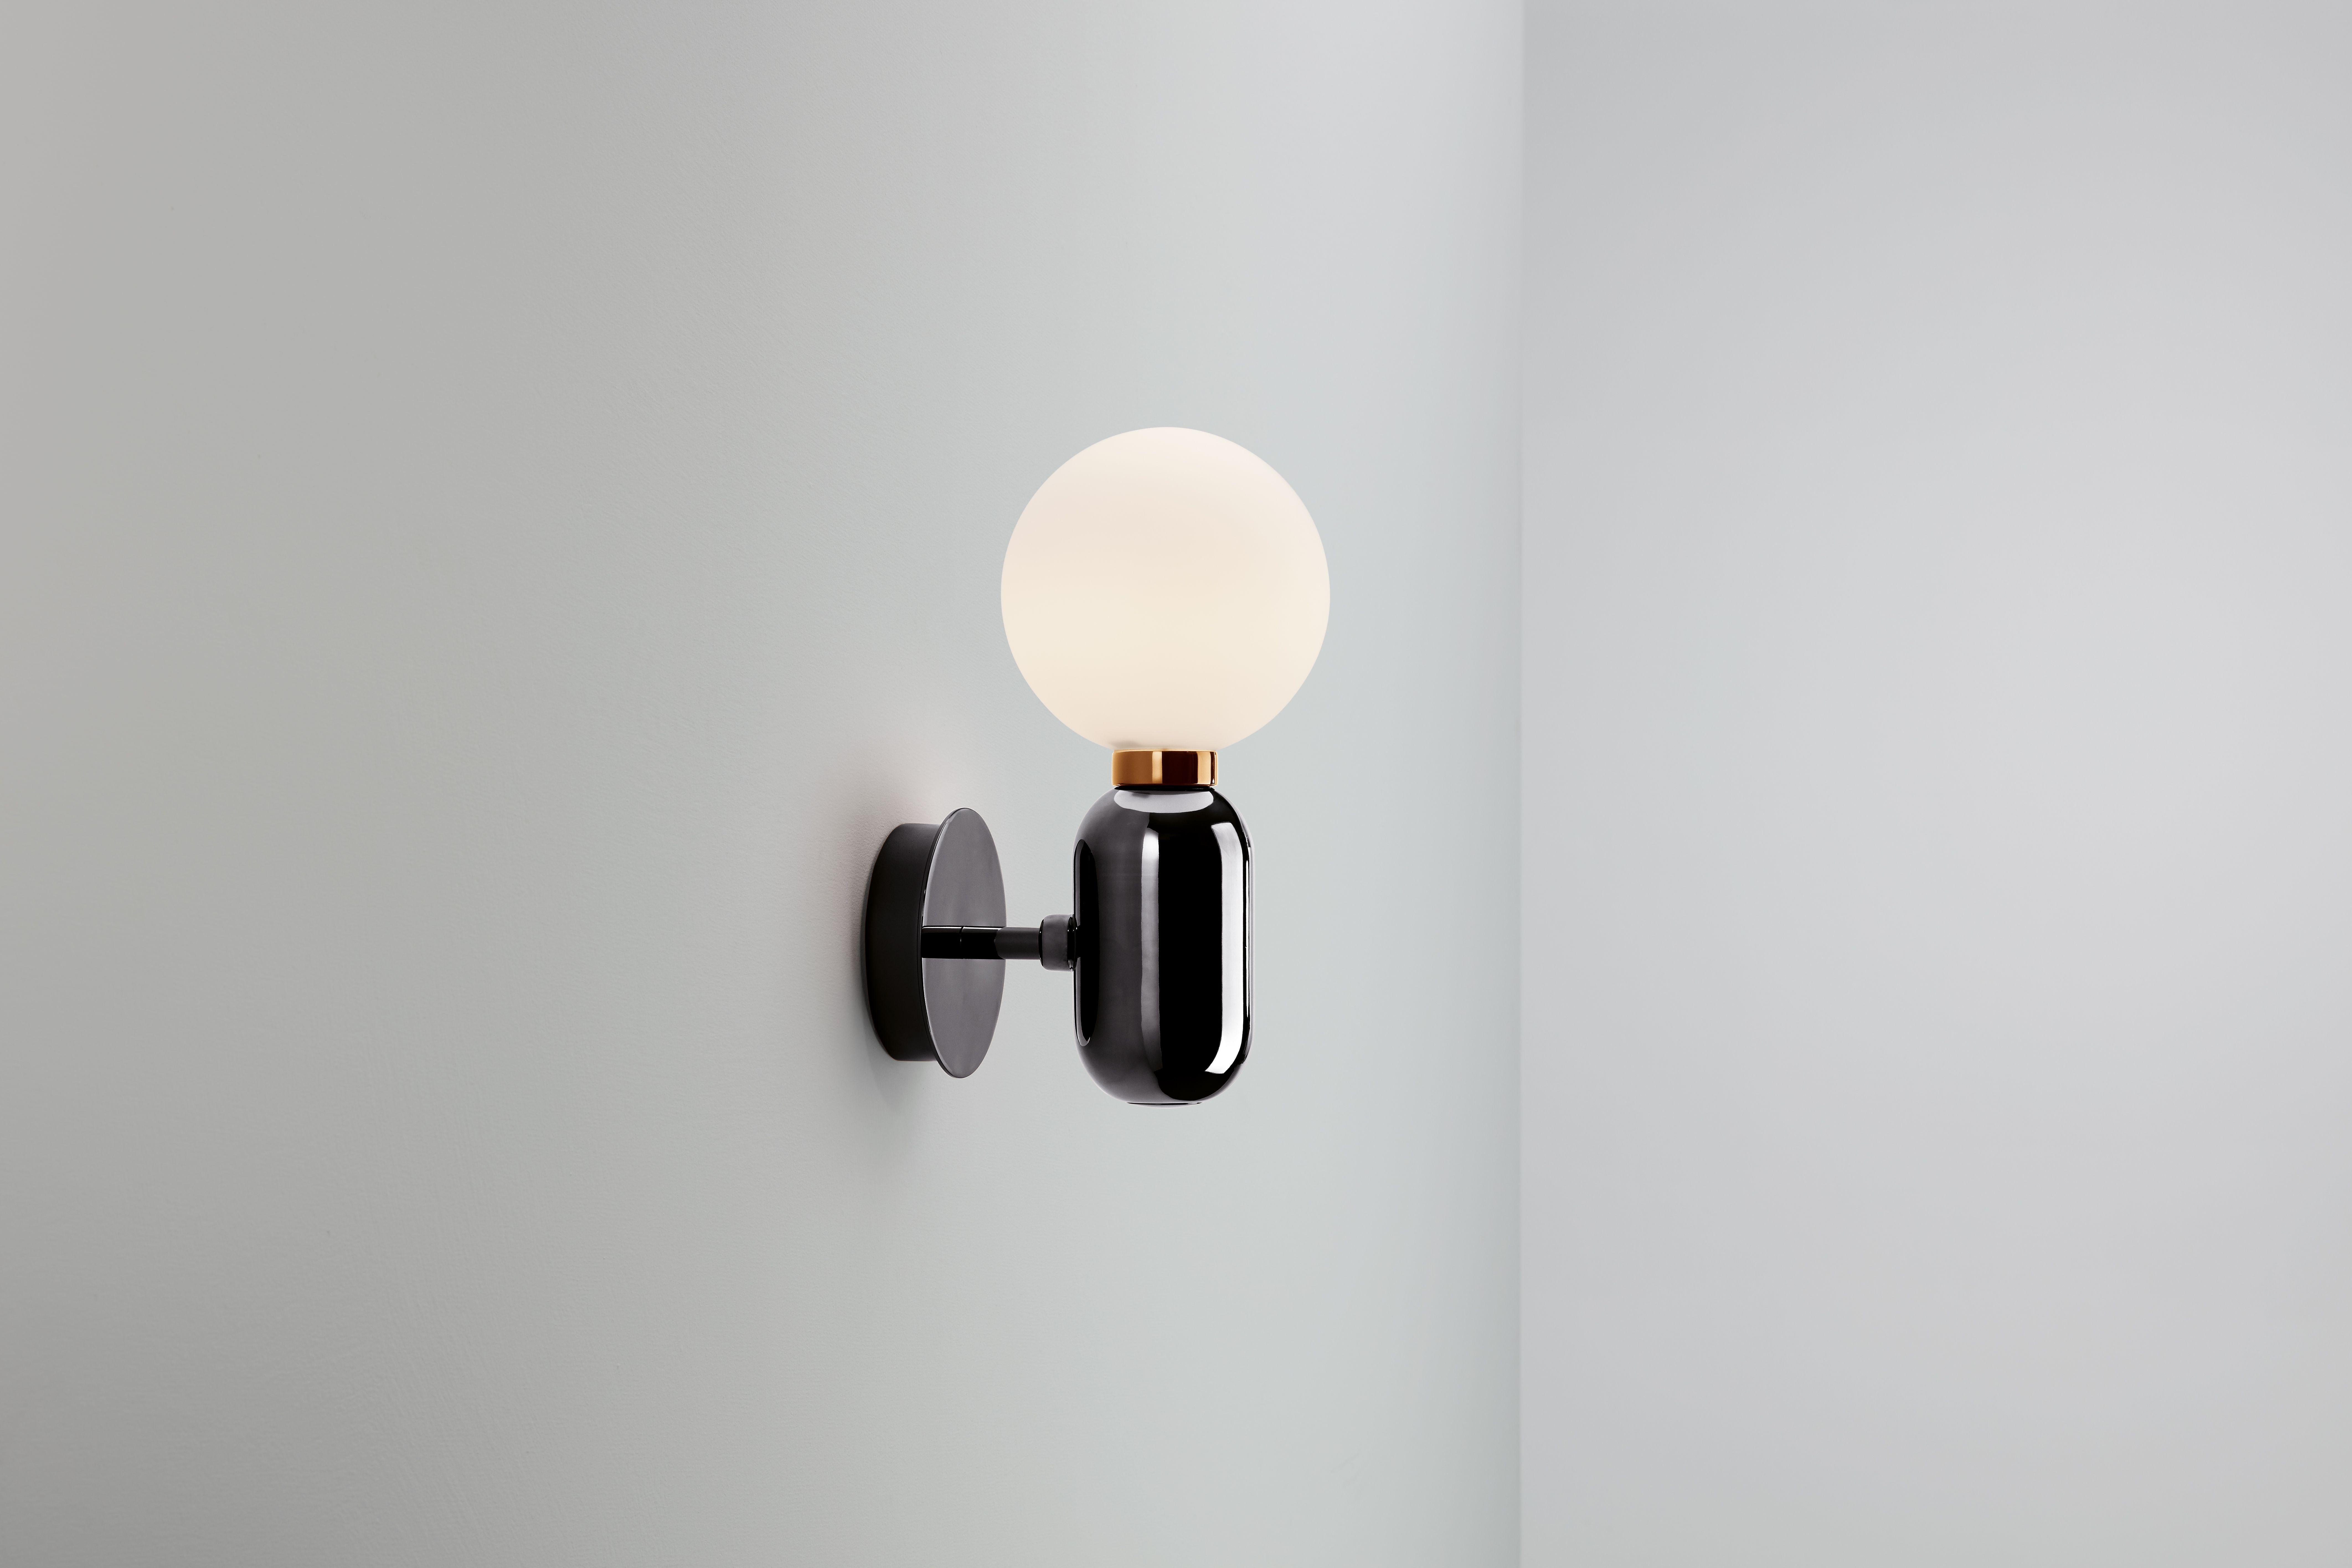 Wall Lamp, model Aballs A, designed by Jaime Hayon in 2013.
Manufactured by Parachilna.
Handmade ceramic black body and blown opal matt glass diffuser.
Base is also available in white, golden, copper or platinum ceramic.

Shiny and eye-catching